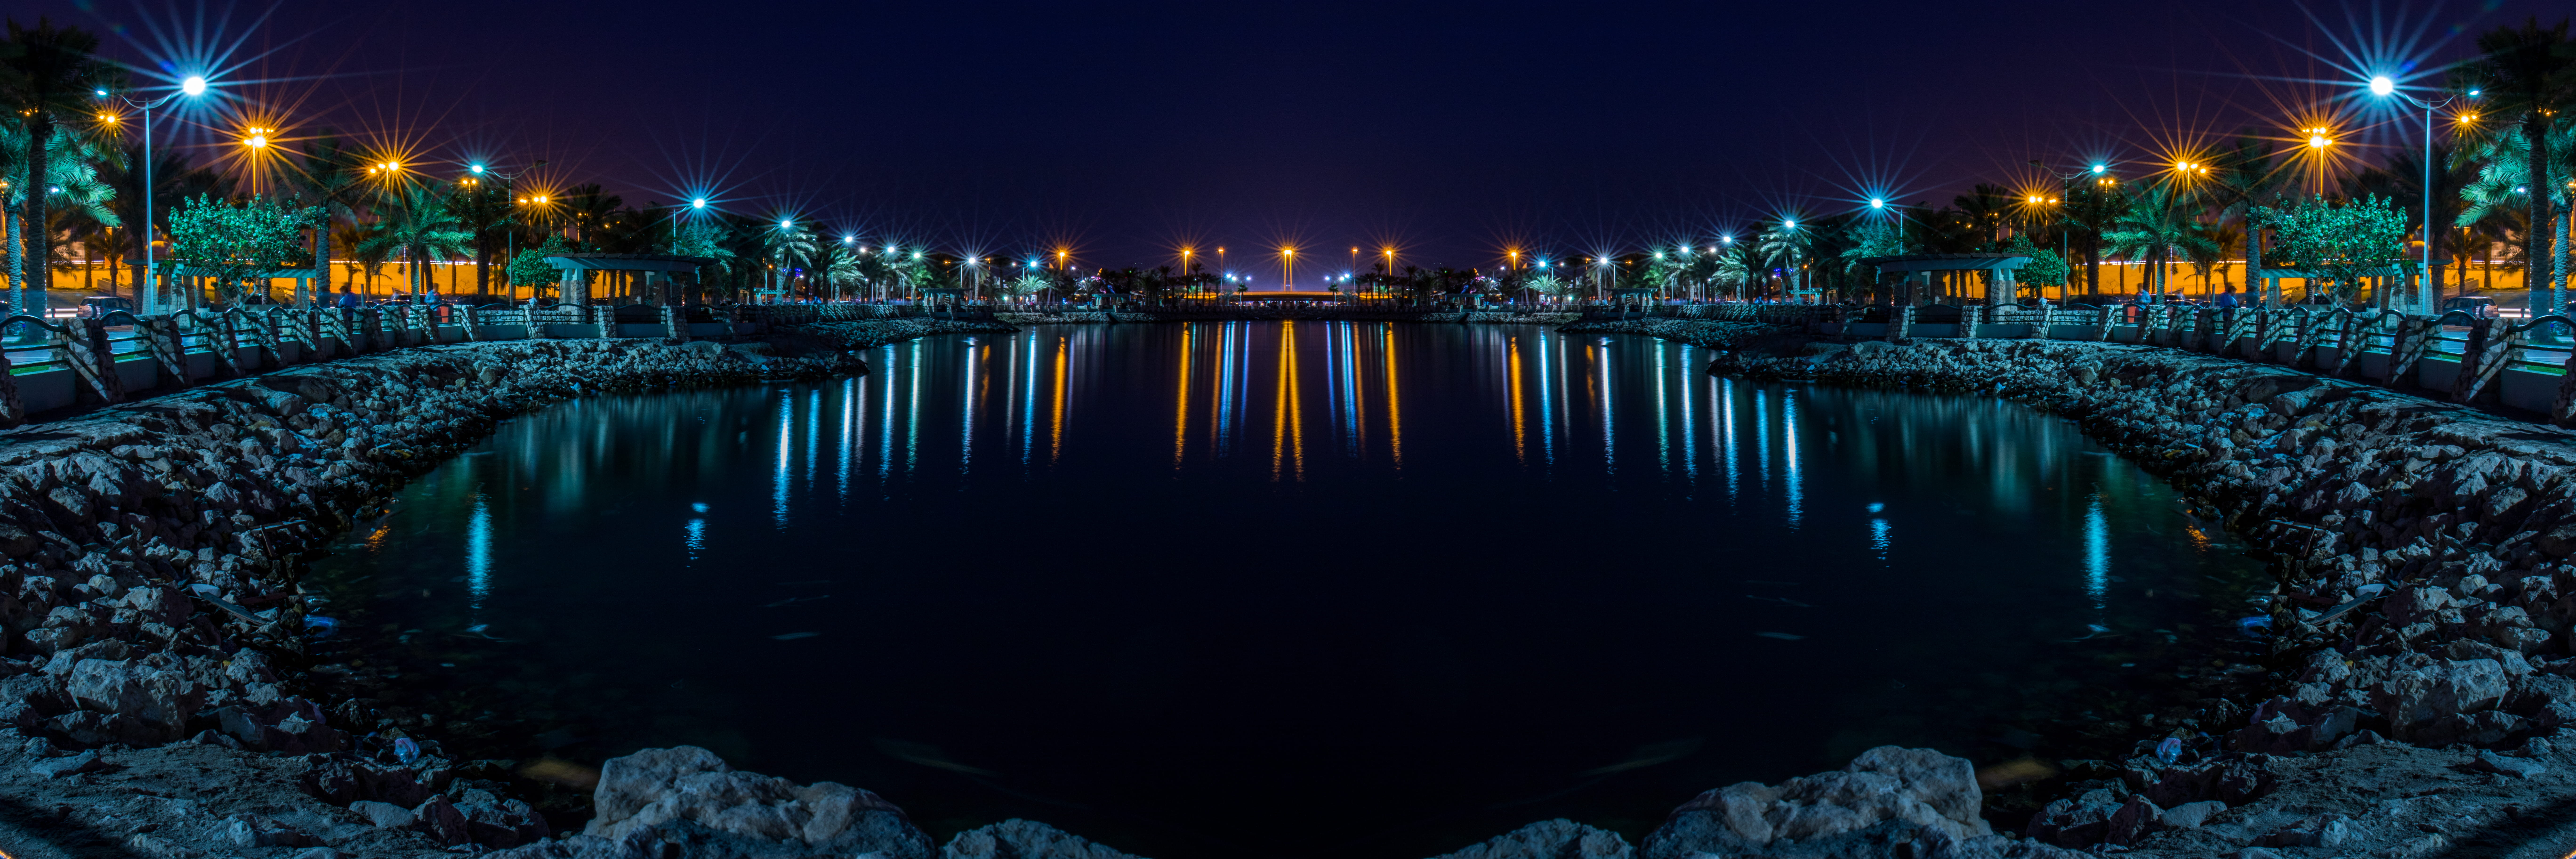 calm water front of street lights at night, nature, outdoors